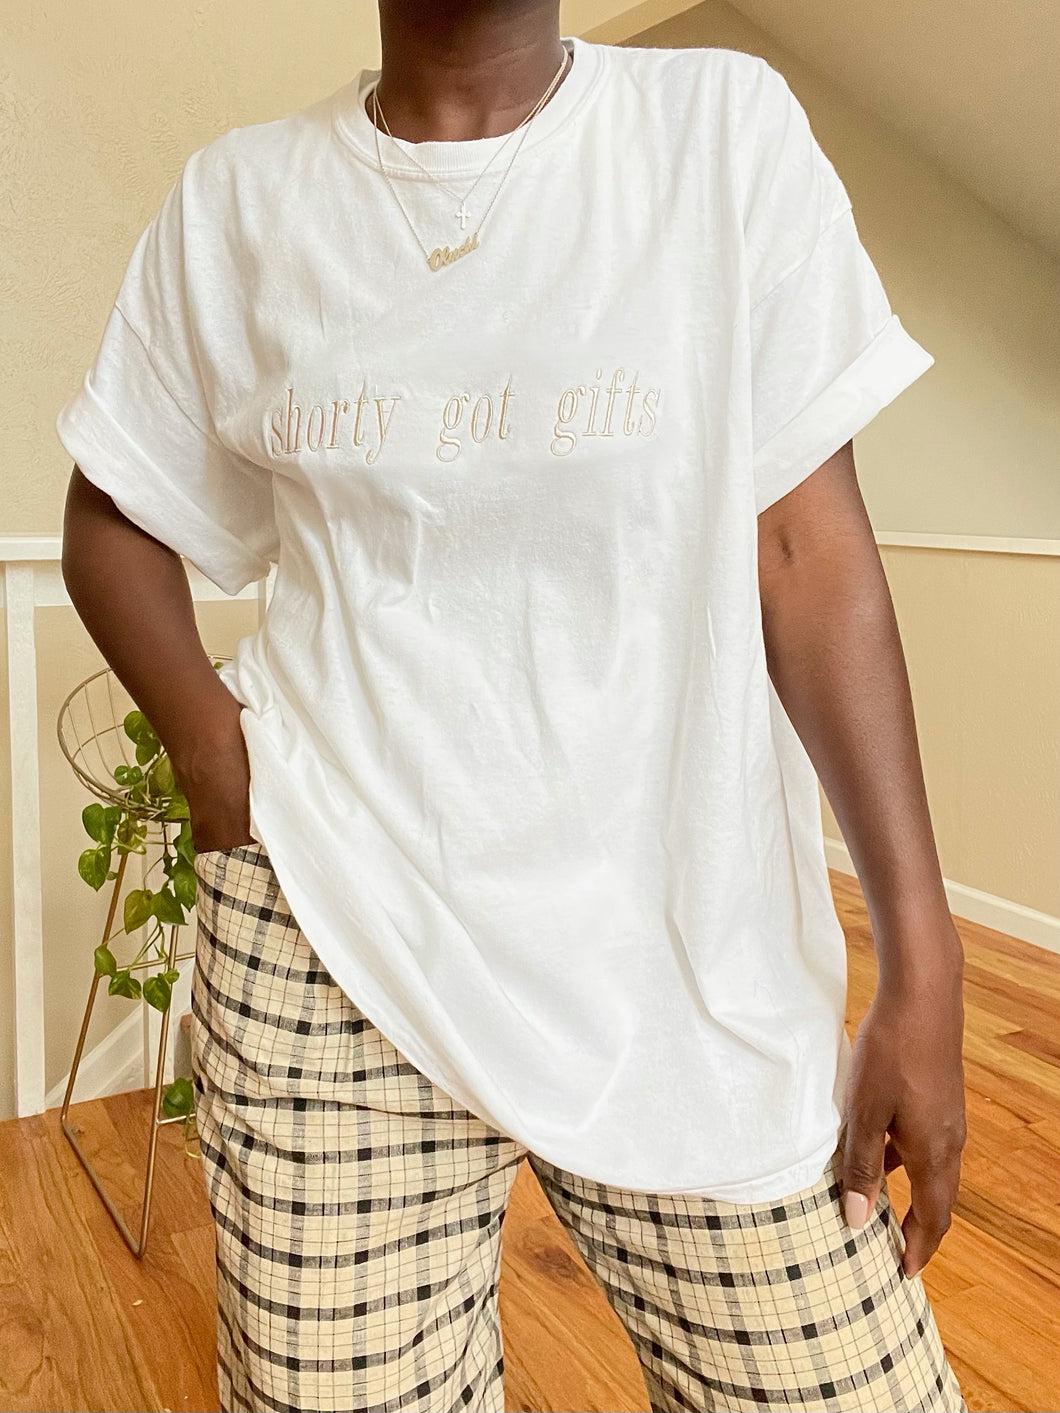 white shorty got gifts tee